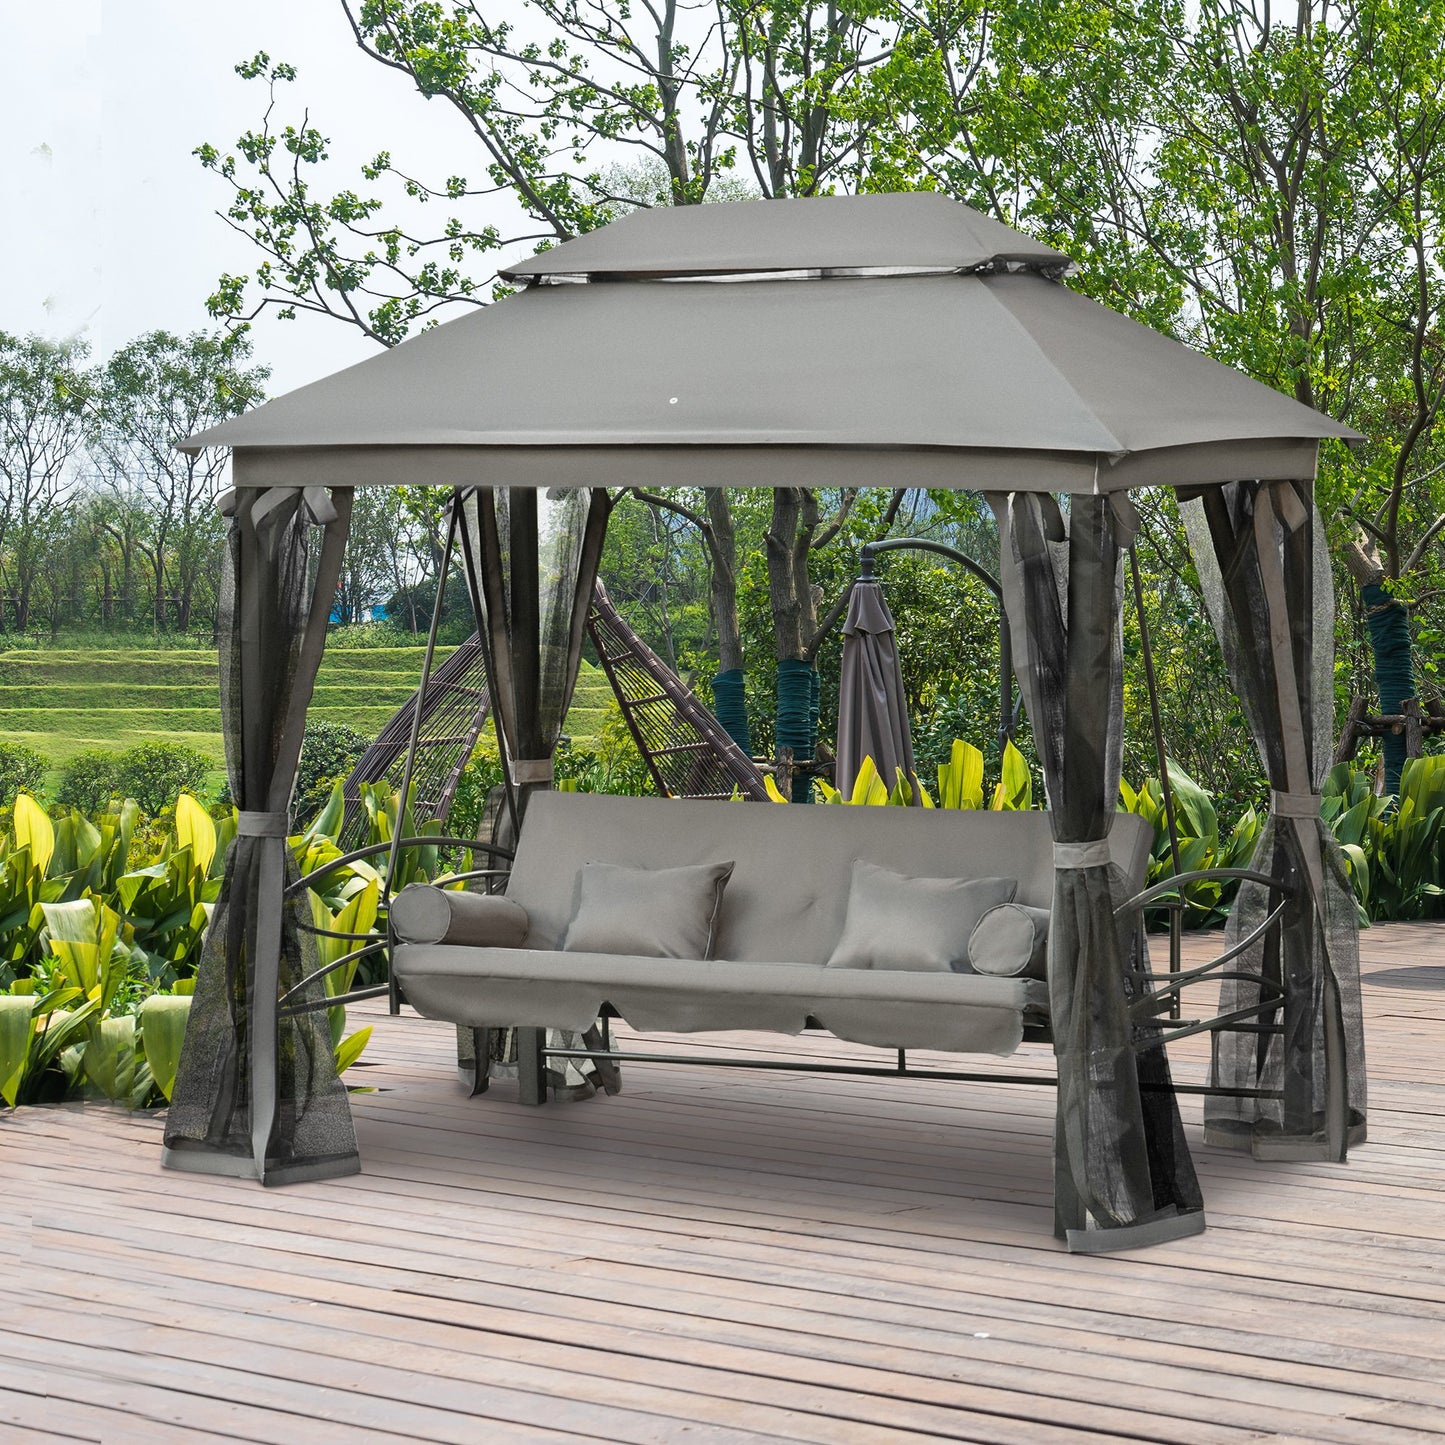 Outsunny 3 Seater Swing Chair Hammock Gazebo Patio Bench Outdoor w/ Cushioned Seat Grey